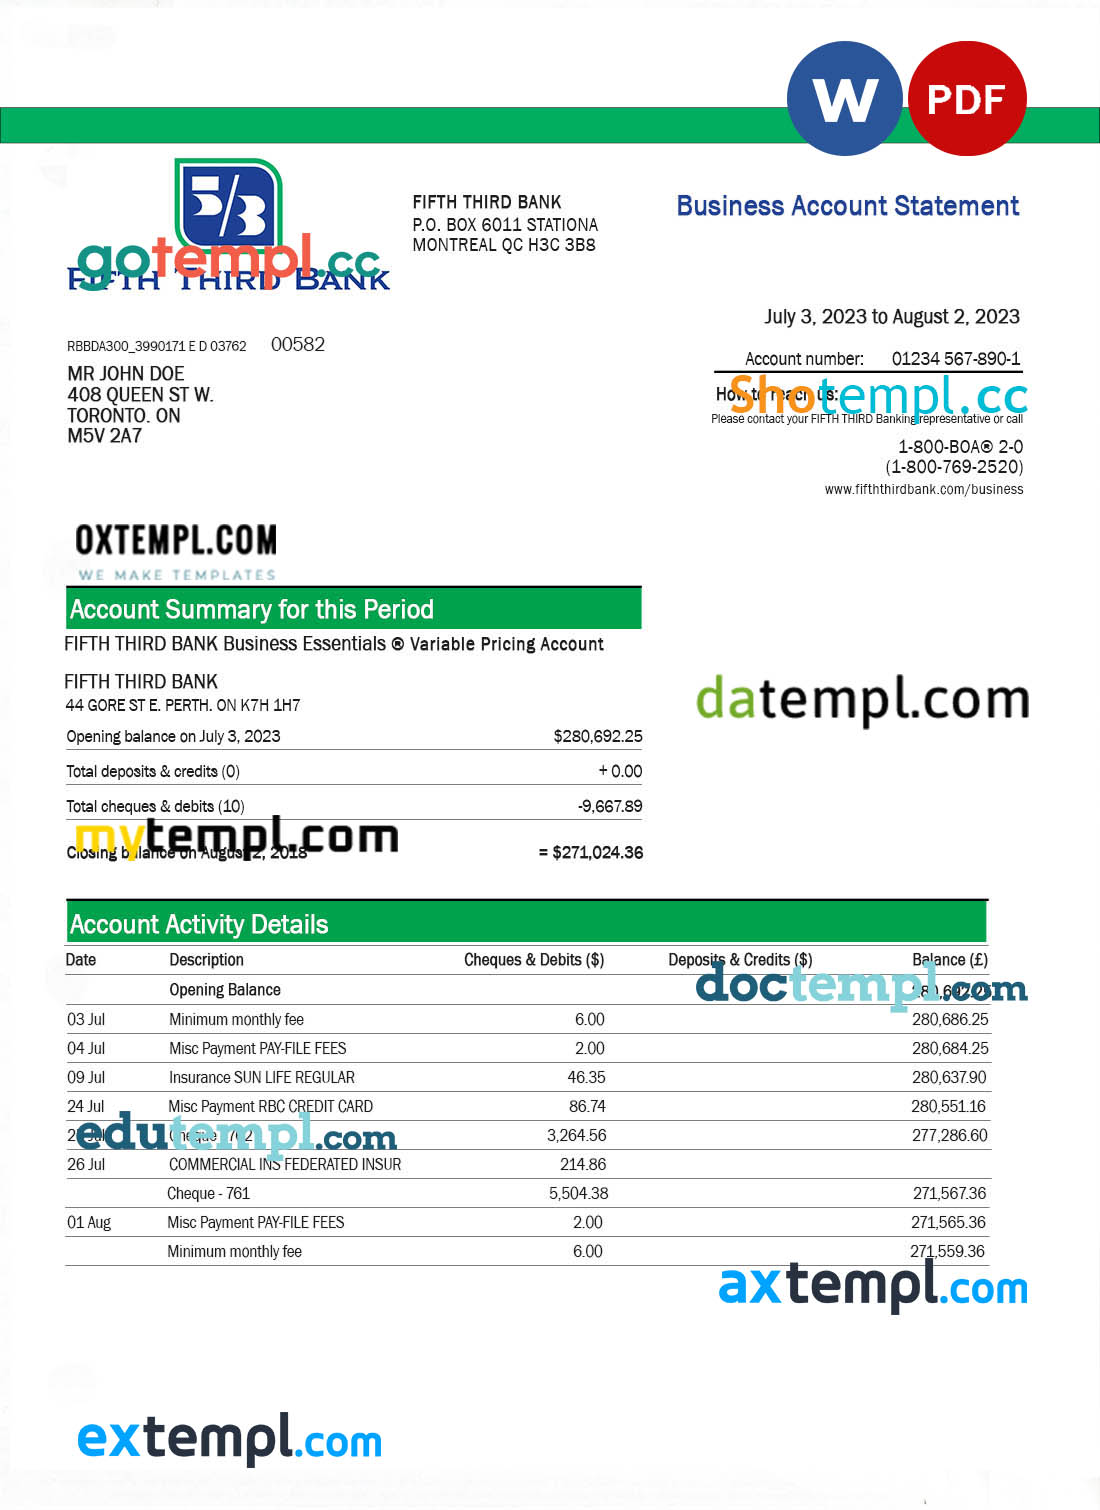 Fifth Third Bank business bank statement Word and PDF template